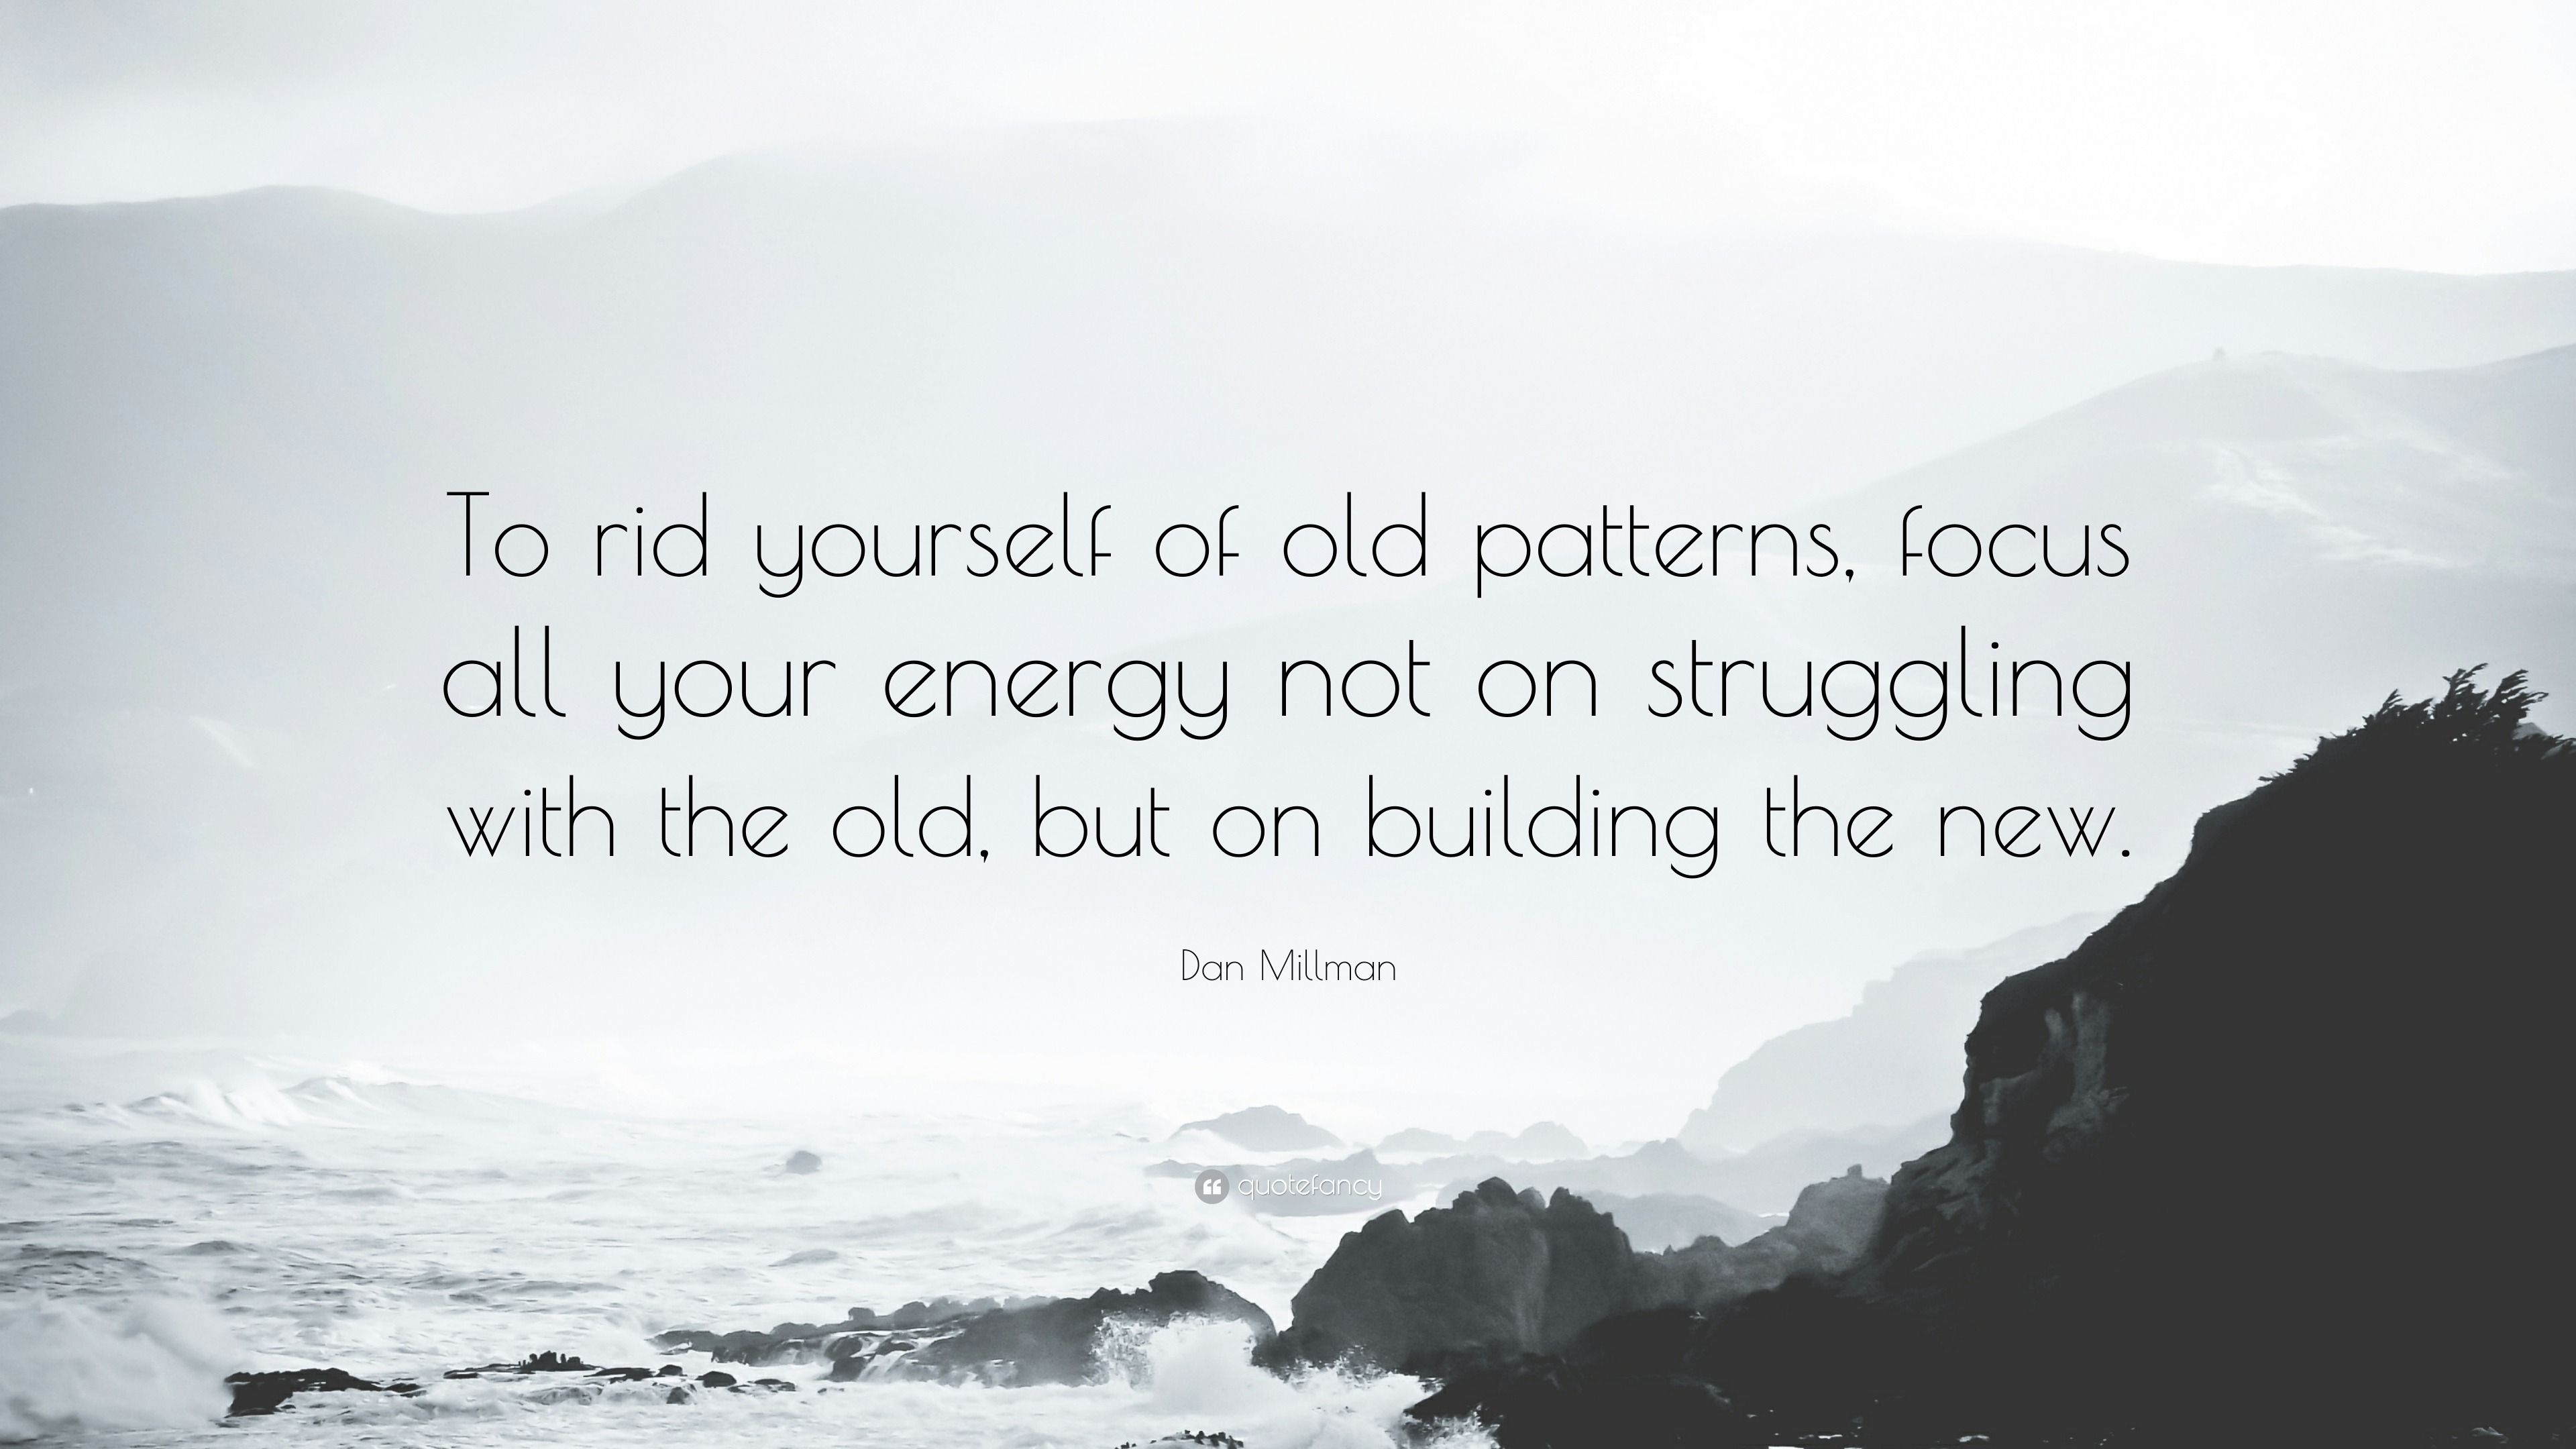 Dan Millman Quote: “To rid yourself of old patterns, focus all your ...